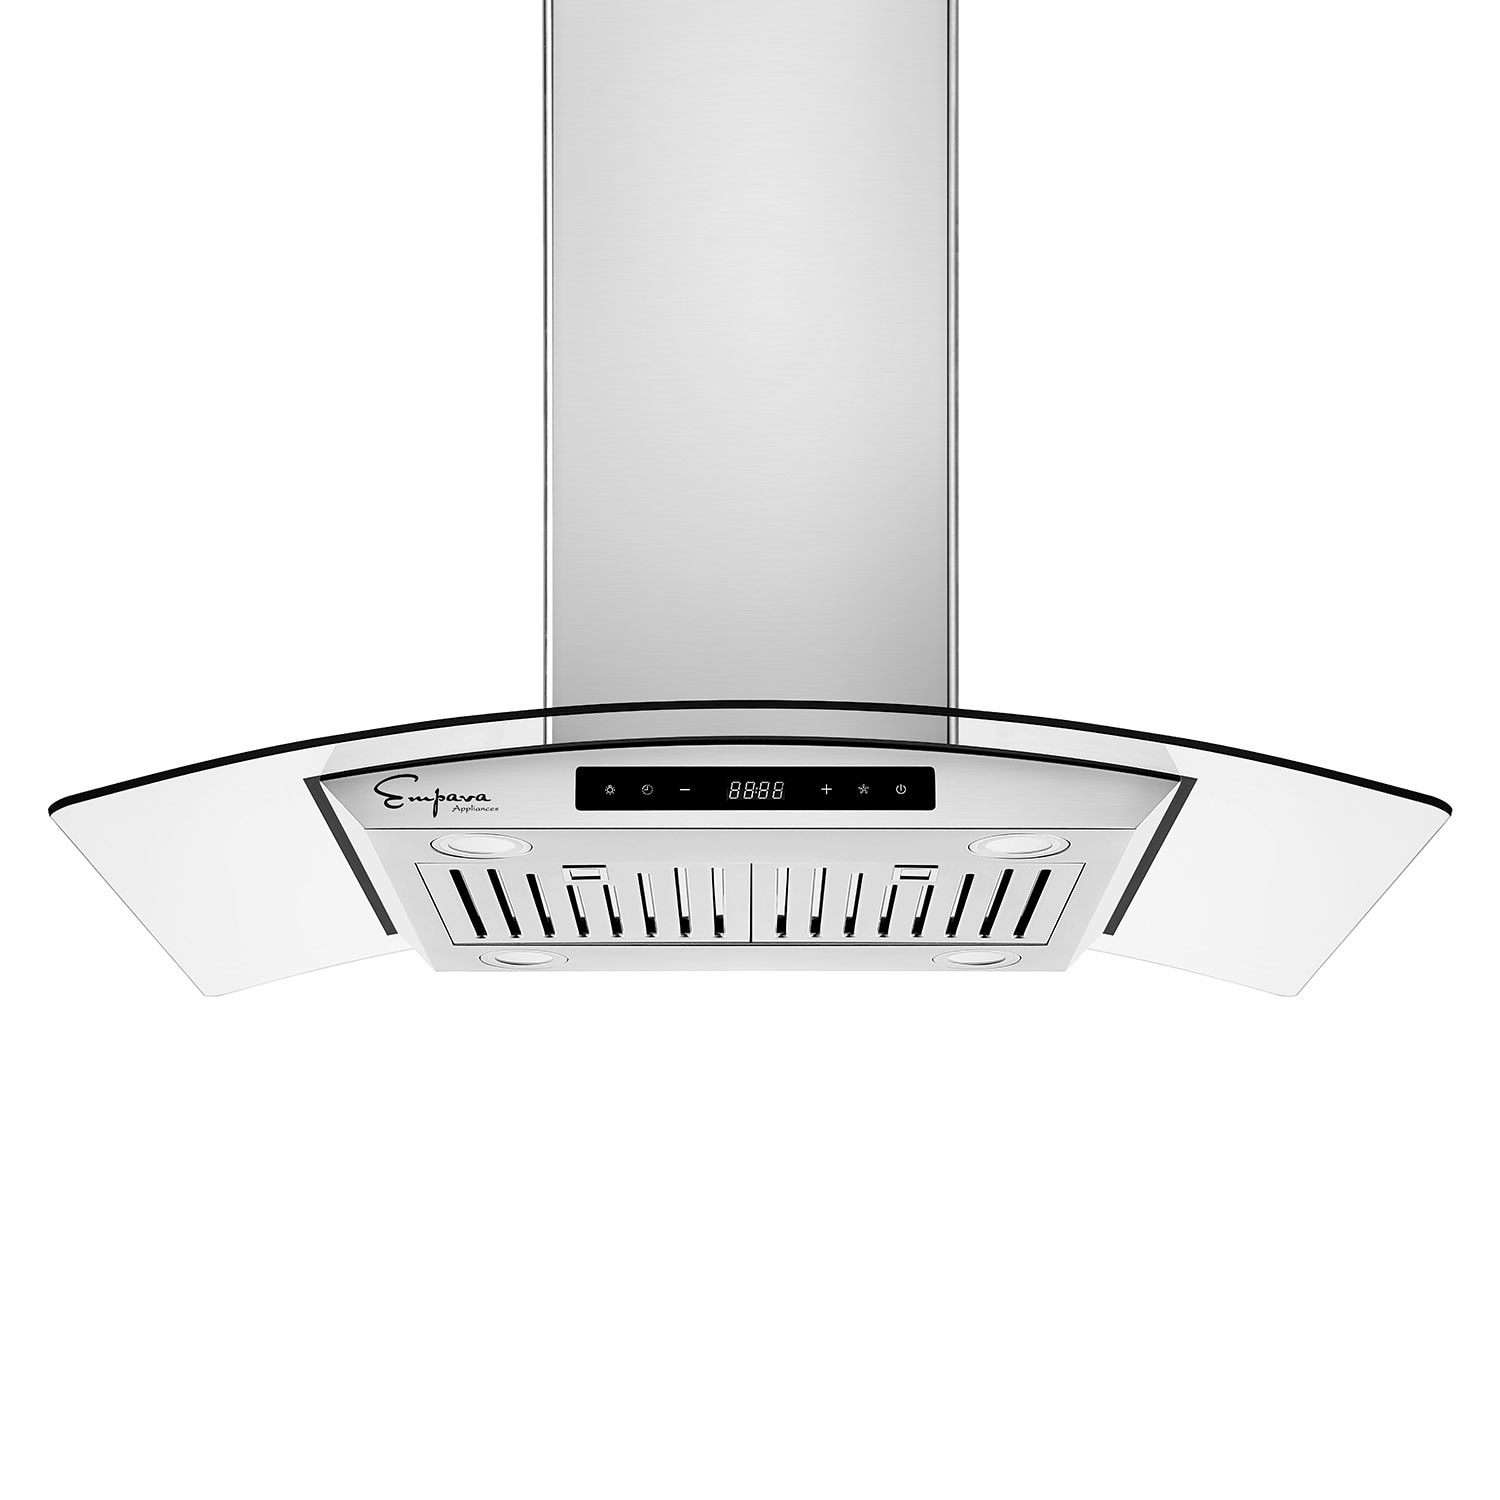 IKTCH 36/30-inch Ducted Insert Range Hood, 900 CFM Stainless Steel Hood with Gesture Control and LED Lights - 36'' - Silver